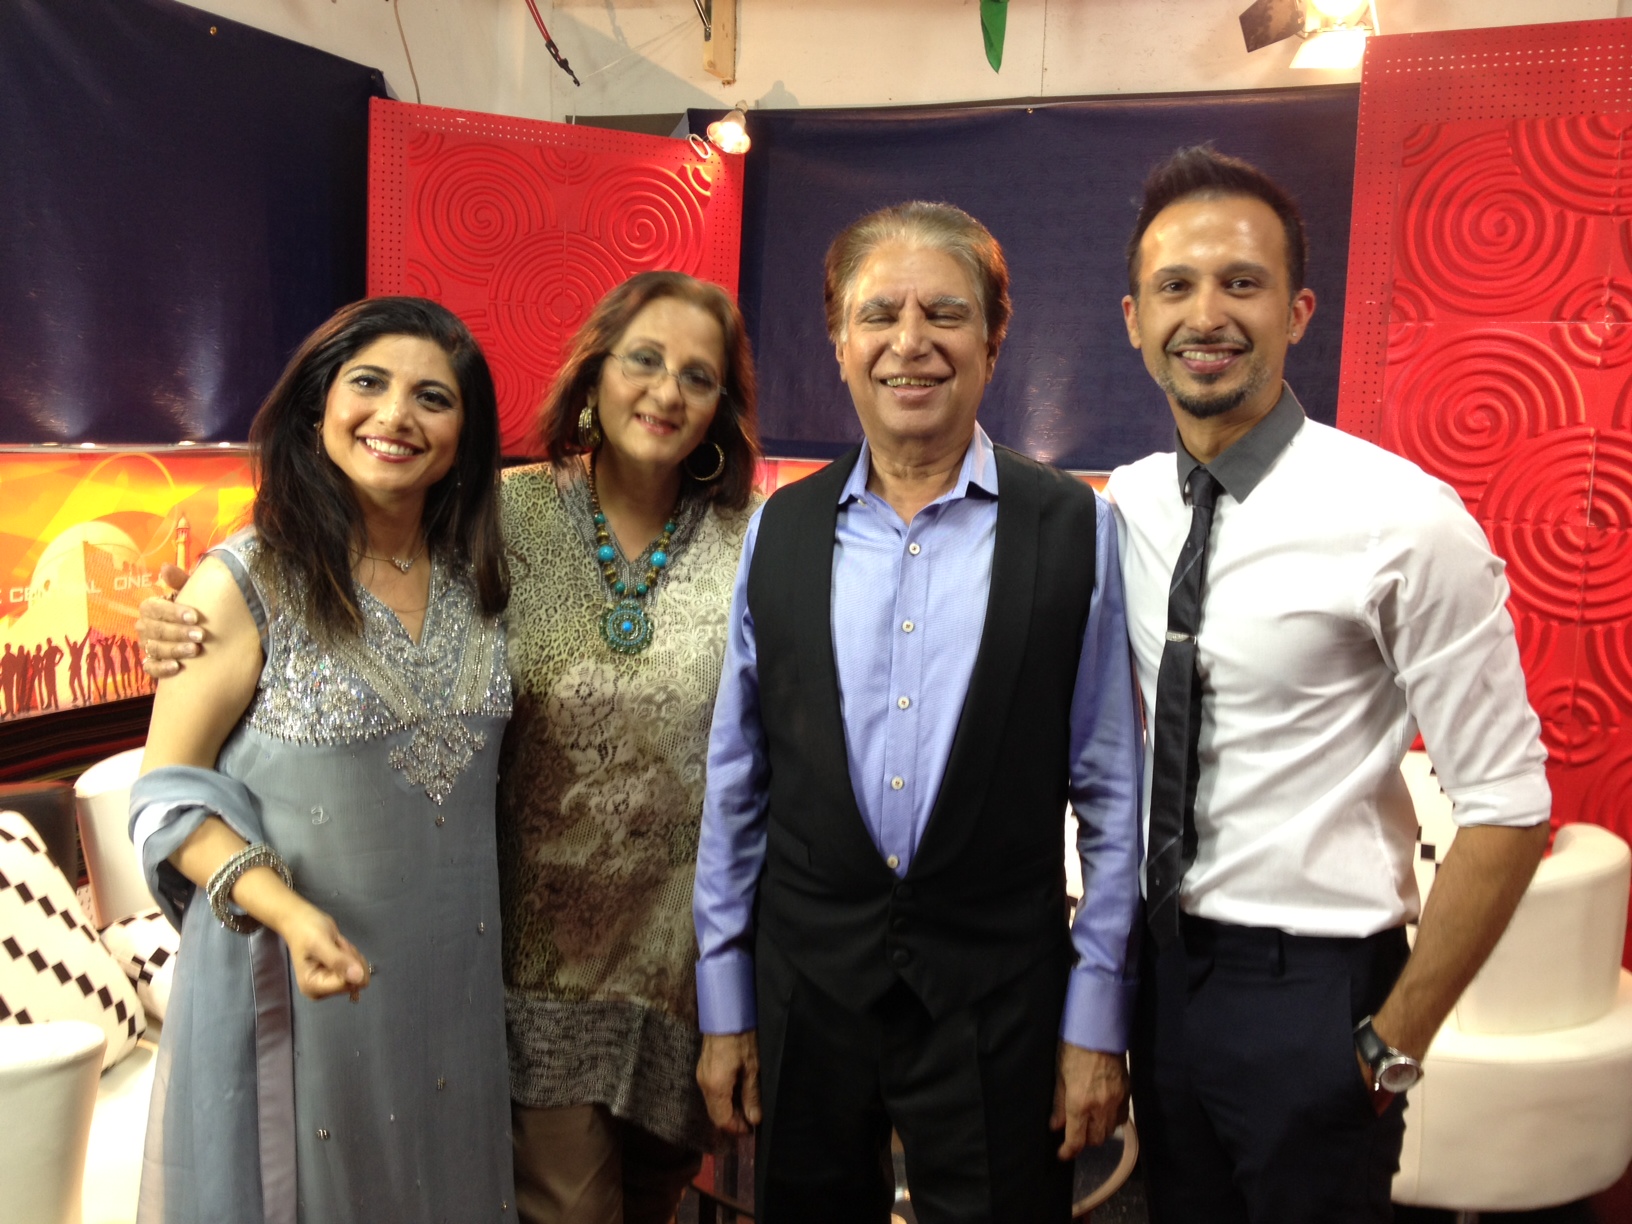 TV Legends,Sahira And Rahat Kazmi with their son Ali Kazmi and his cohost nazish Hosting One Central on TVONE Canada